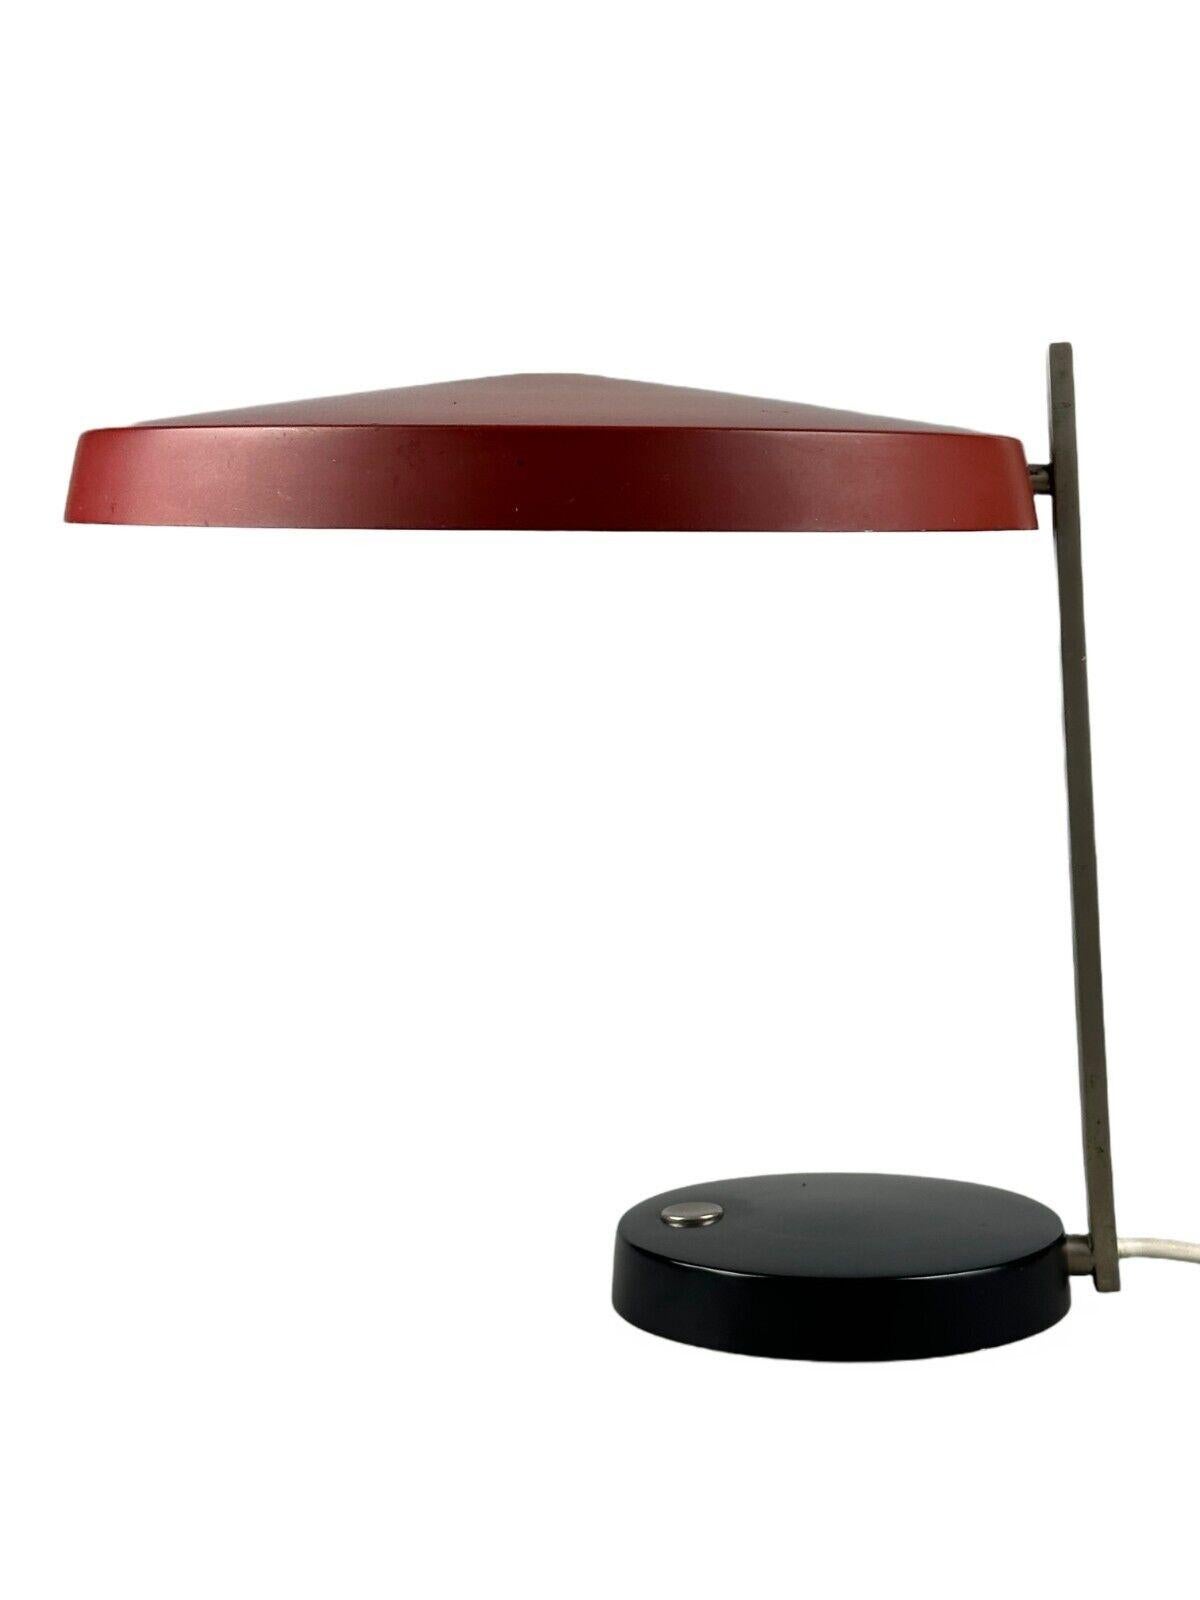 60s 70s table lamp desk lamp by Heinz Pfänder for Hillebrand

Object: table lamp

Manufacturer: Hillebrand

Condition: good

Age: around 1960-1970

Material: metal, plastic

Dimensions:

Width = 31.5cm
Depth = 30cm
Height = 30cm

Other notes:

2x